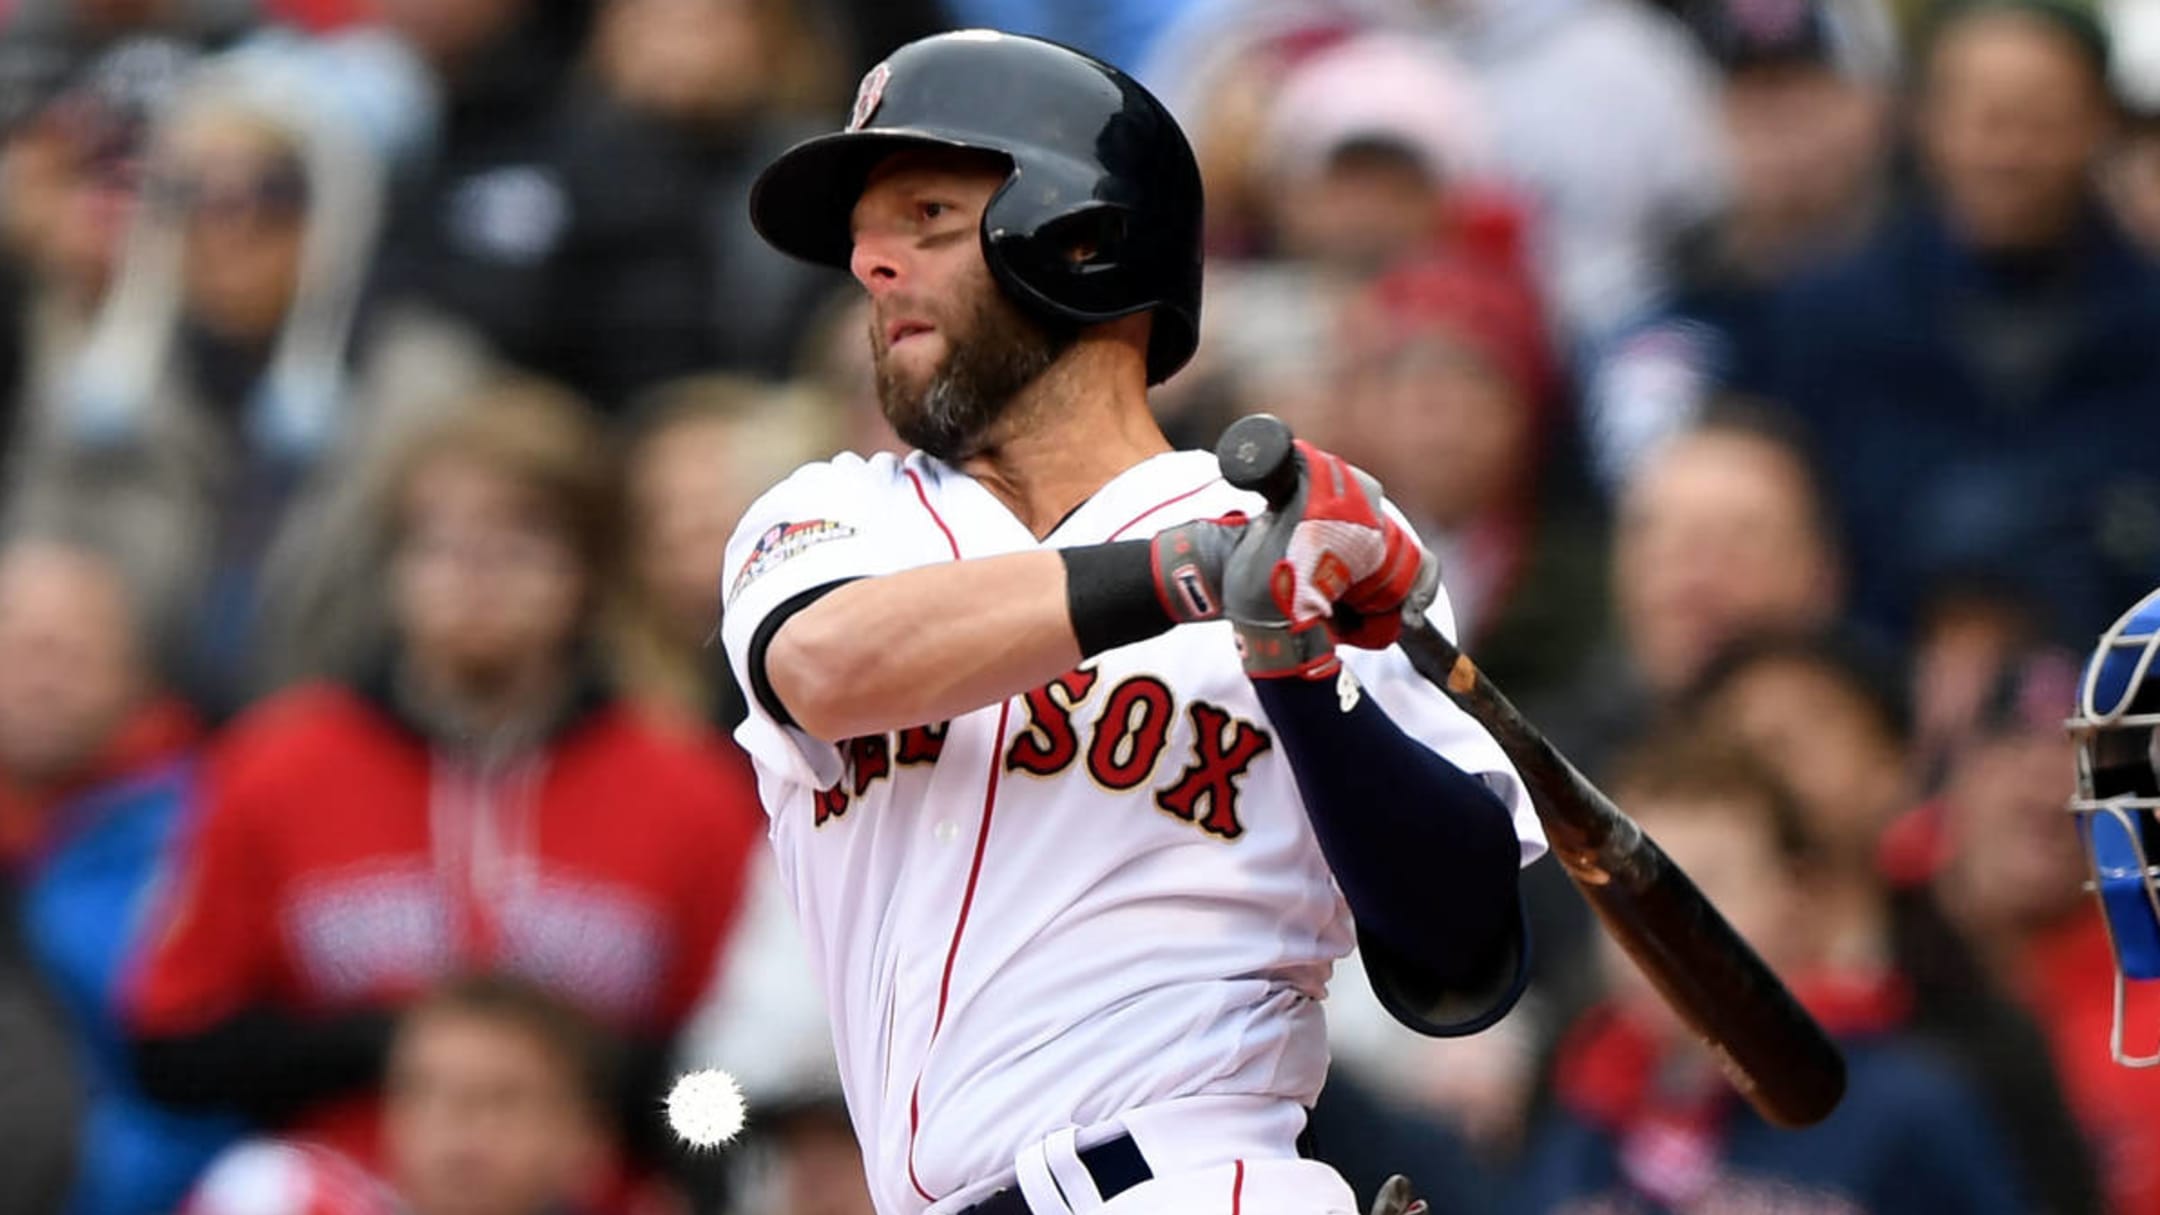 Dustin Pedroia retiring after amazing Red Sox run